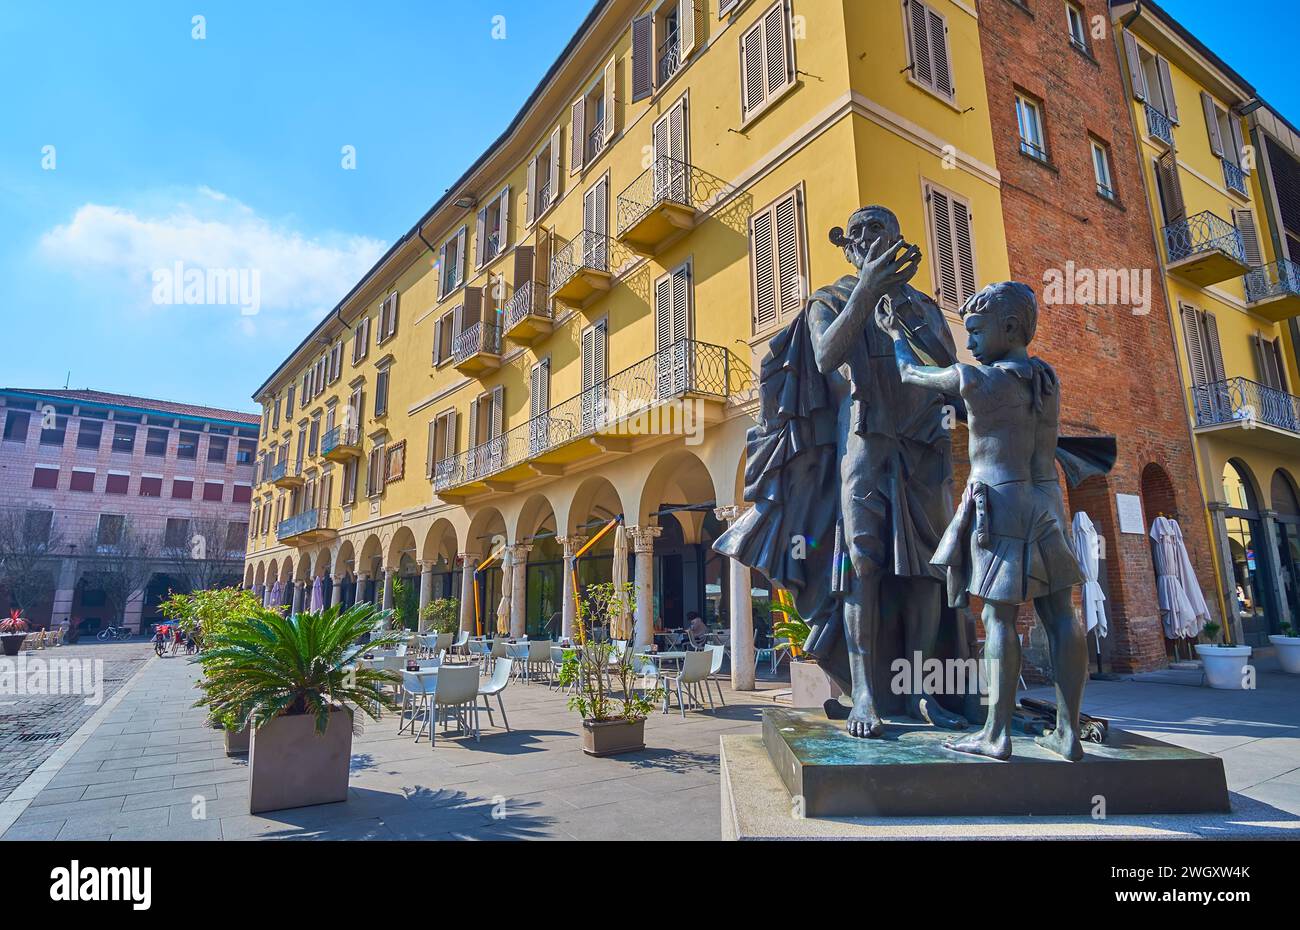 CREMONA, ITALY - APRIL 6, 2022: The statue of Antonio Stradivari against historic house with outdoor dining, Cremona, Italy Stock Photo